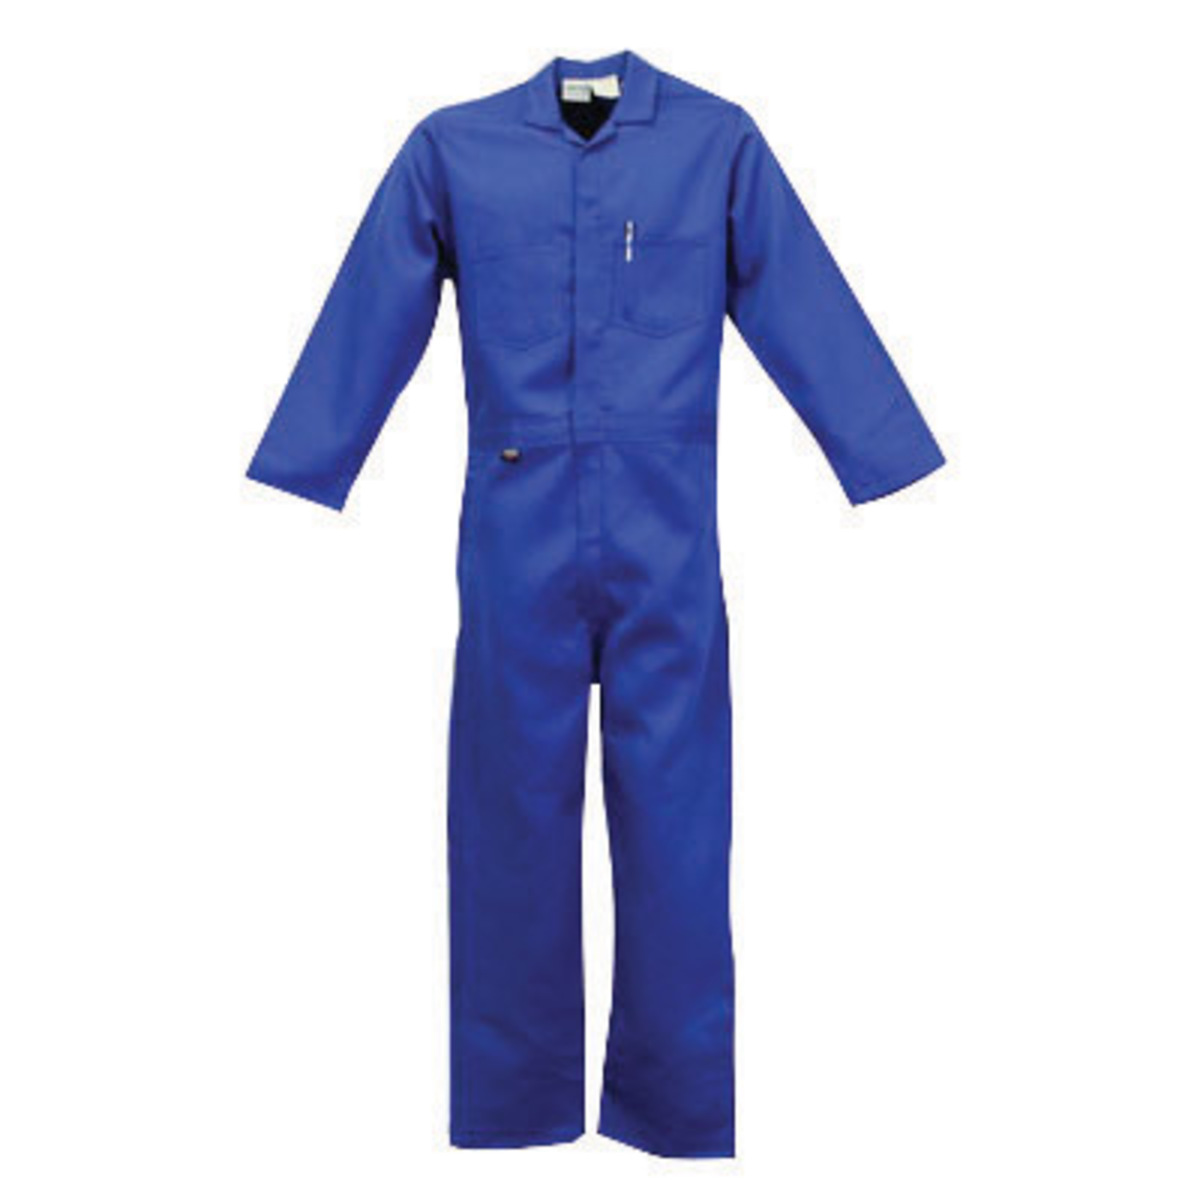 Stanco Safety Products™ X-Large Royal Blue Indura® UltraSoft® Arc Rated Flame Resistant Coveralls With Front Zipper Closure